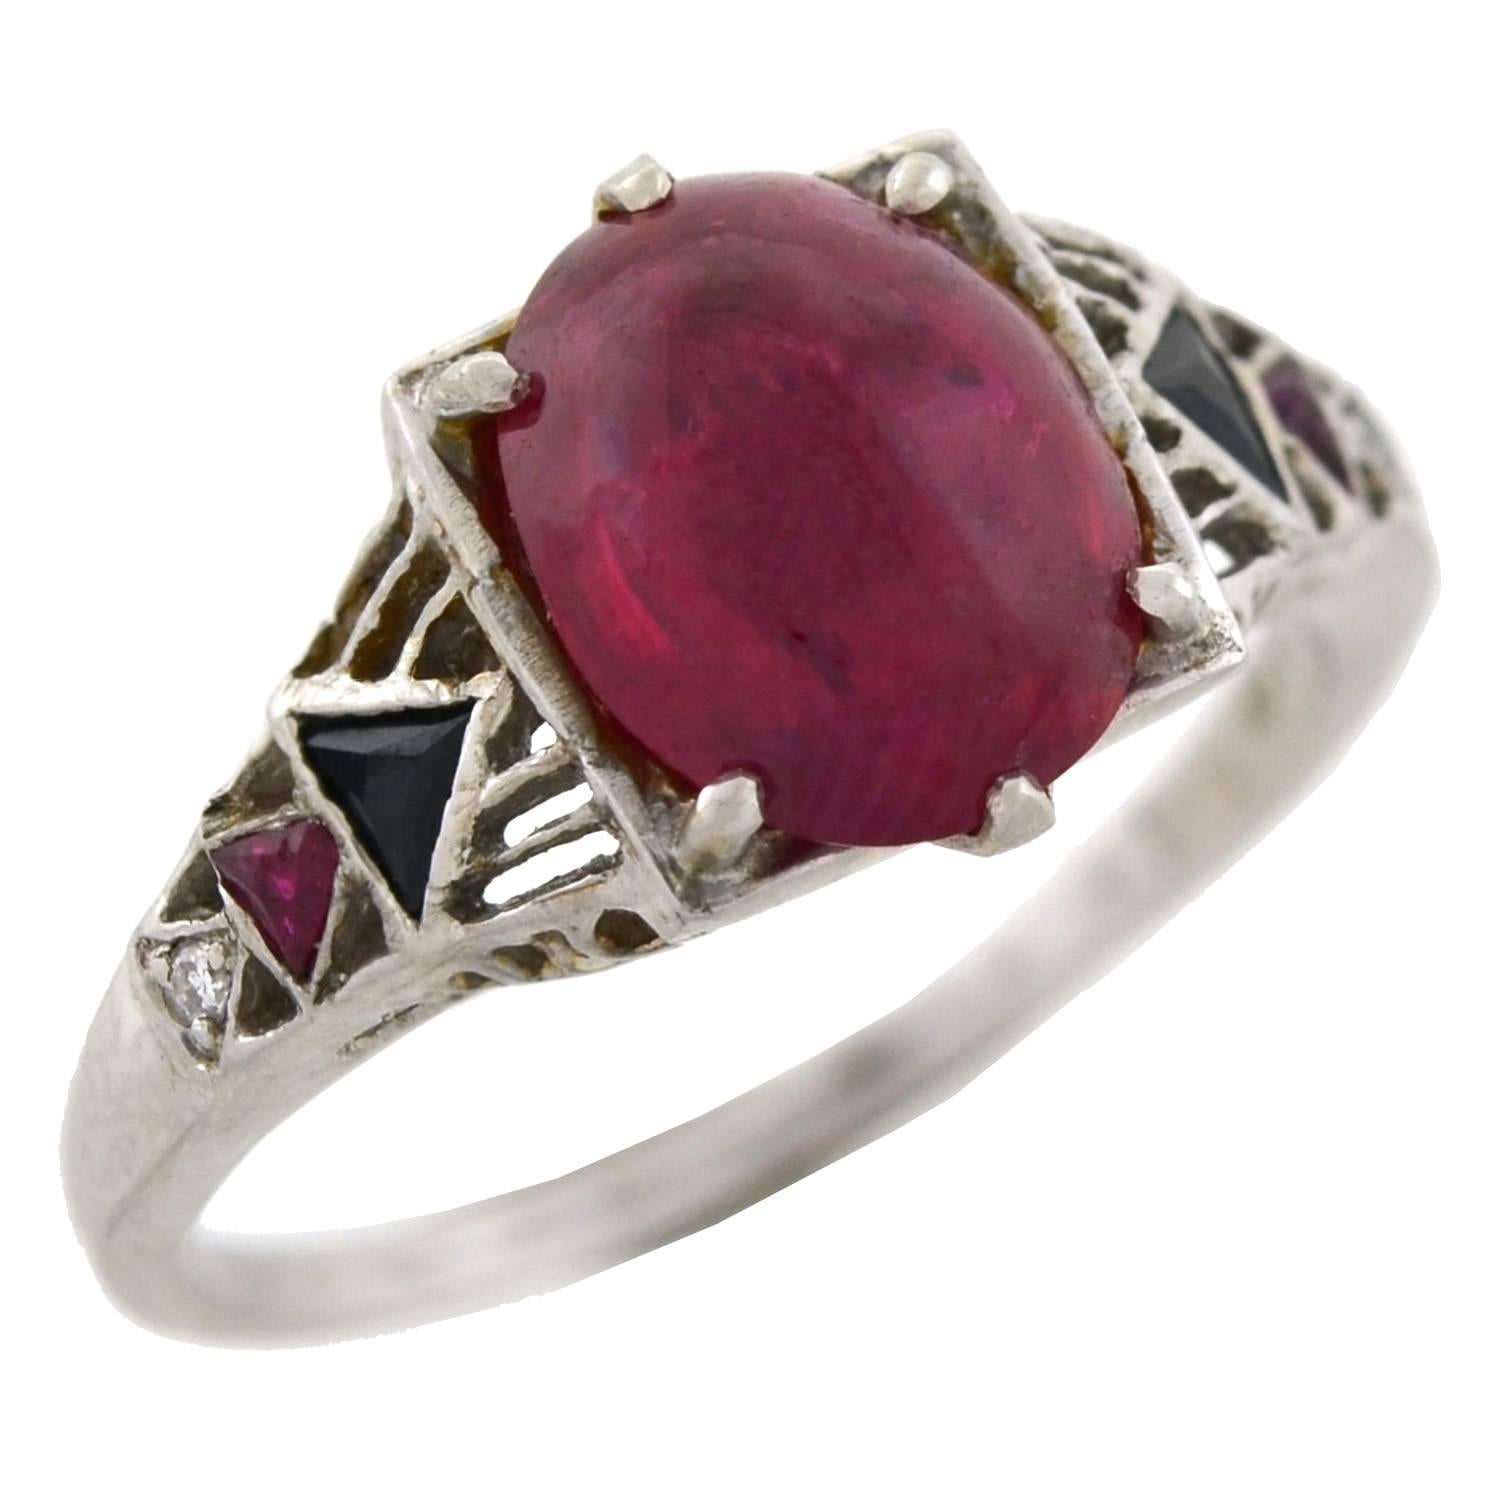 Women's Art Deco GIA Certified 3.50 Carat Natural Ruby Cabochon, Onyx, and Diamond Ring